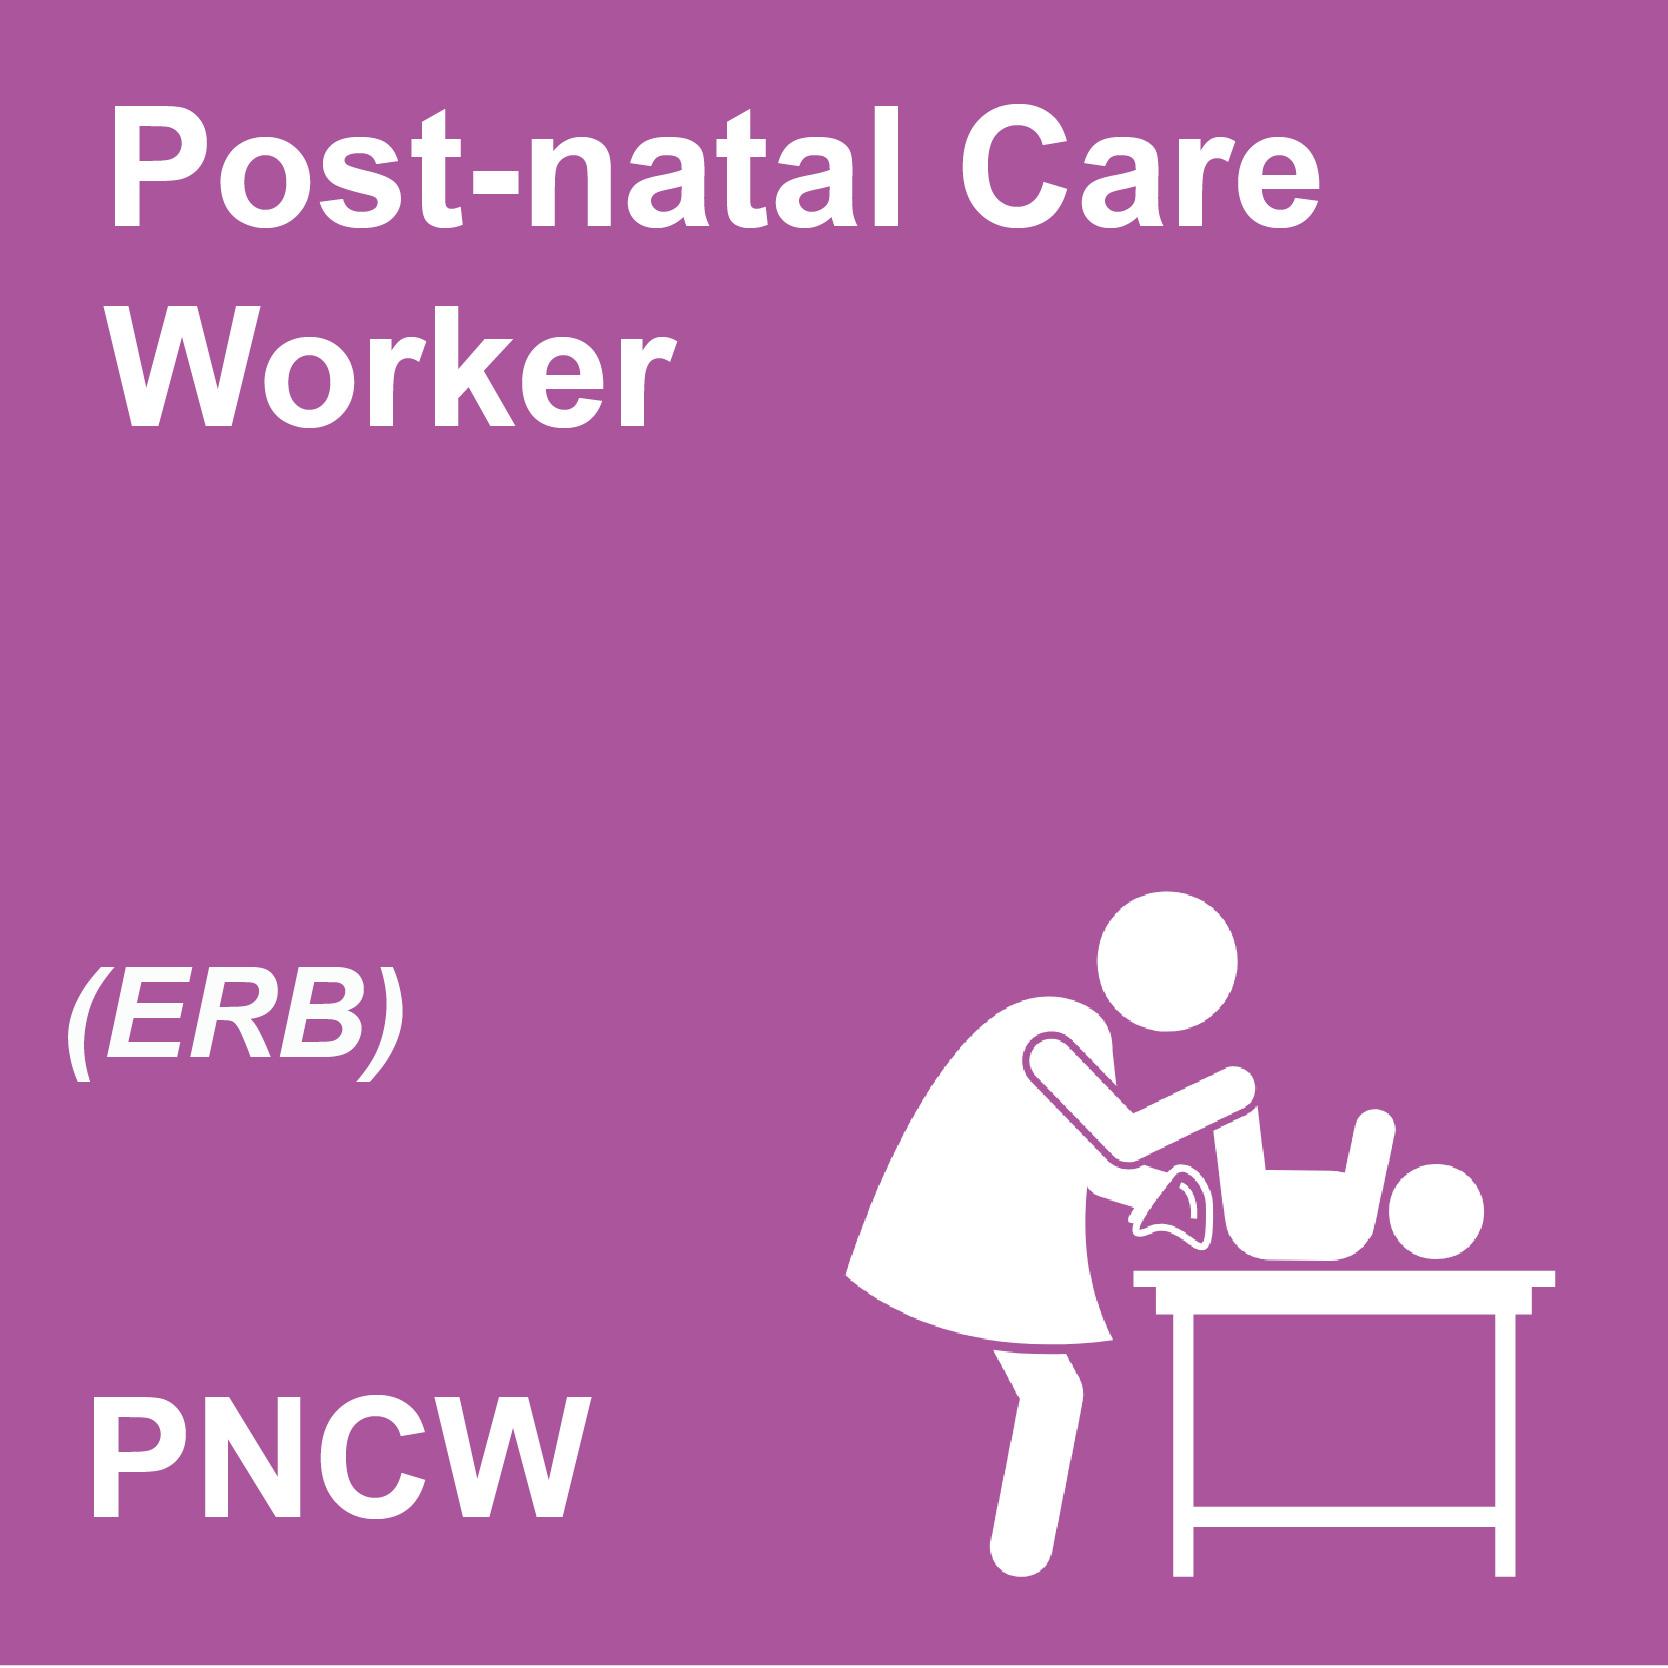 Foundation Certificate in Post-natal Care Worker Training